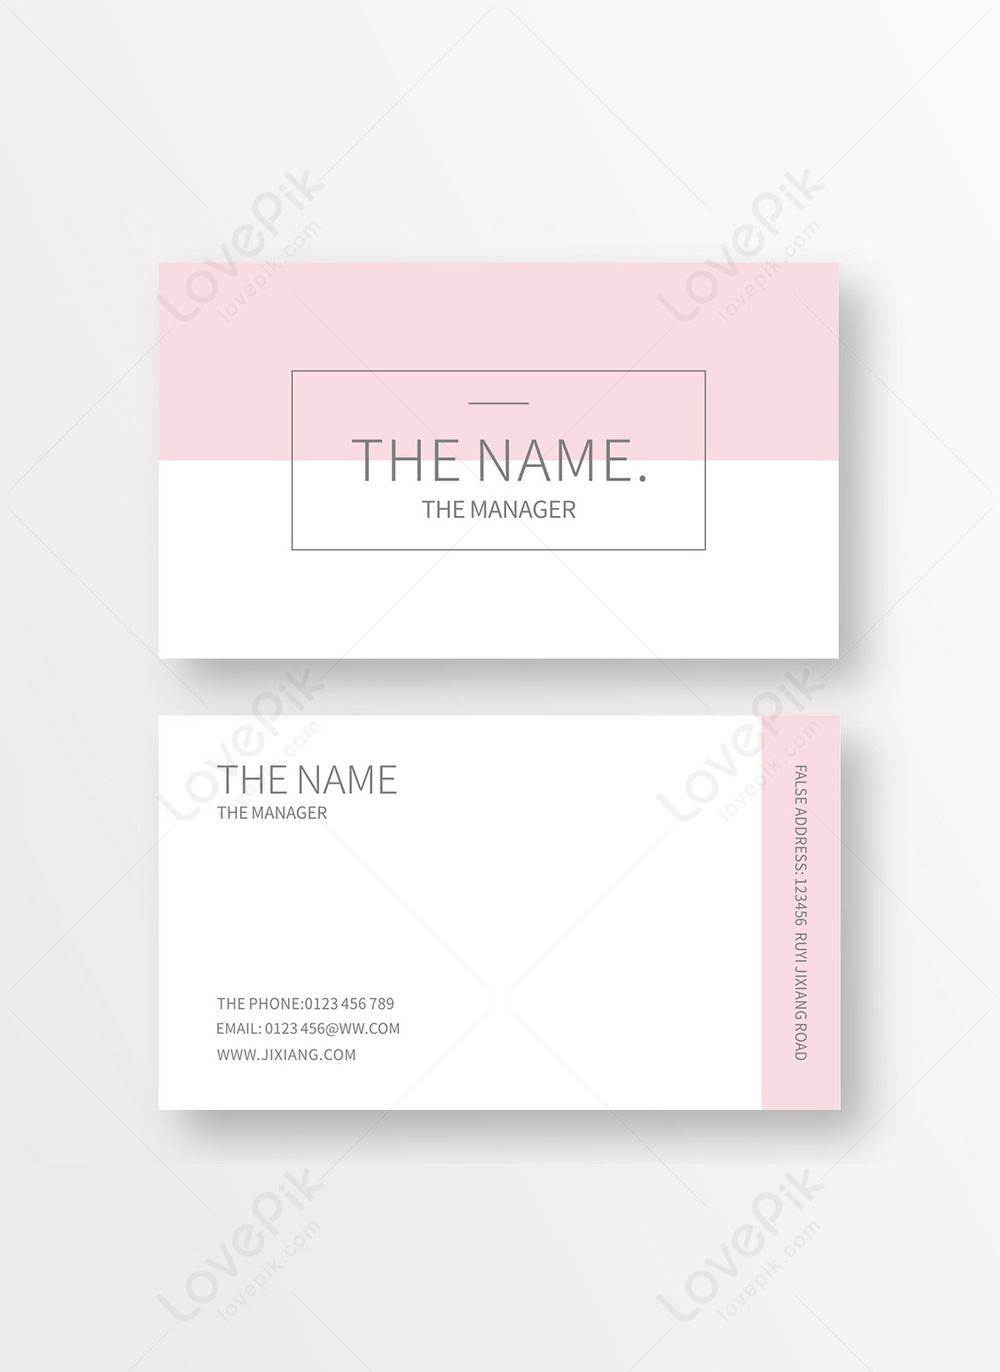 Horizontal Business Card Template from img.lovepik.com